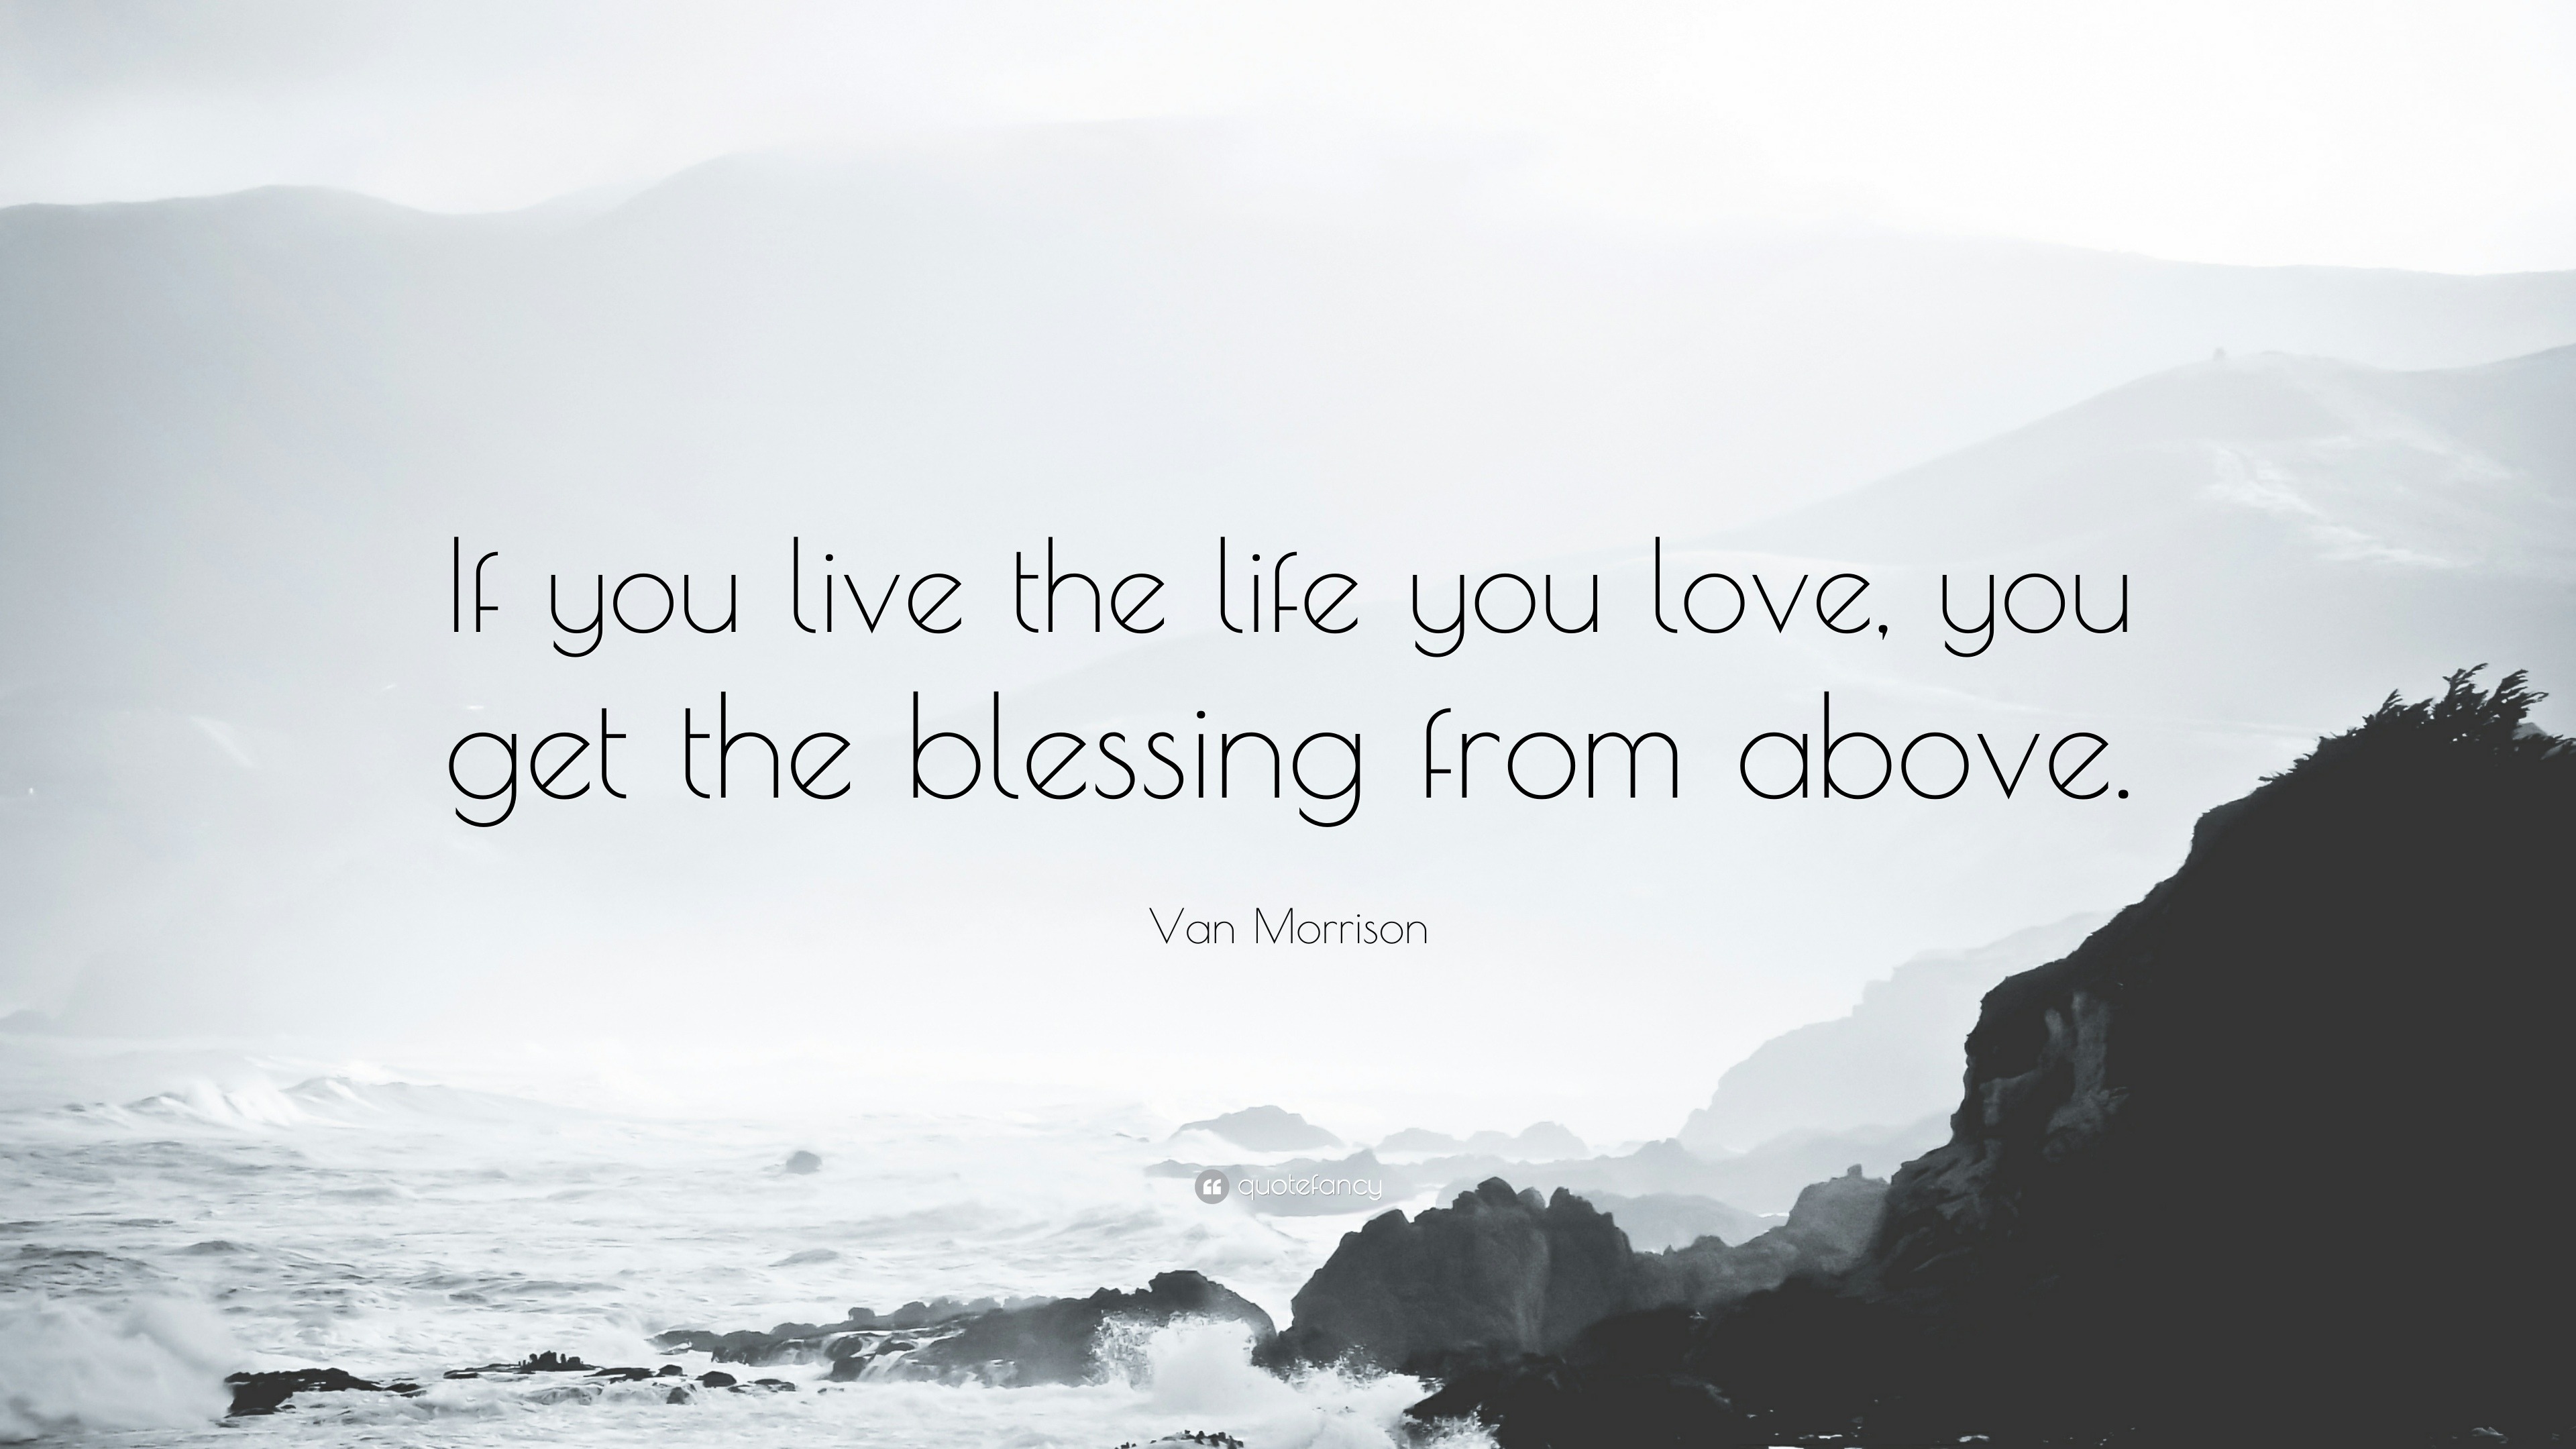 Van Morrison Quote If You Live The Life You Love You Get The Blessing From Above